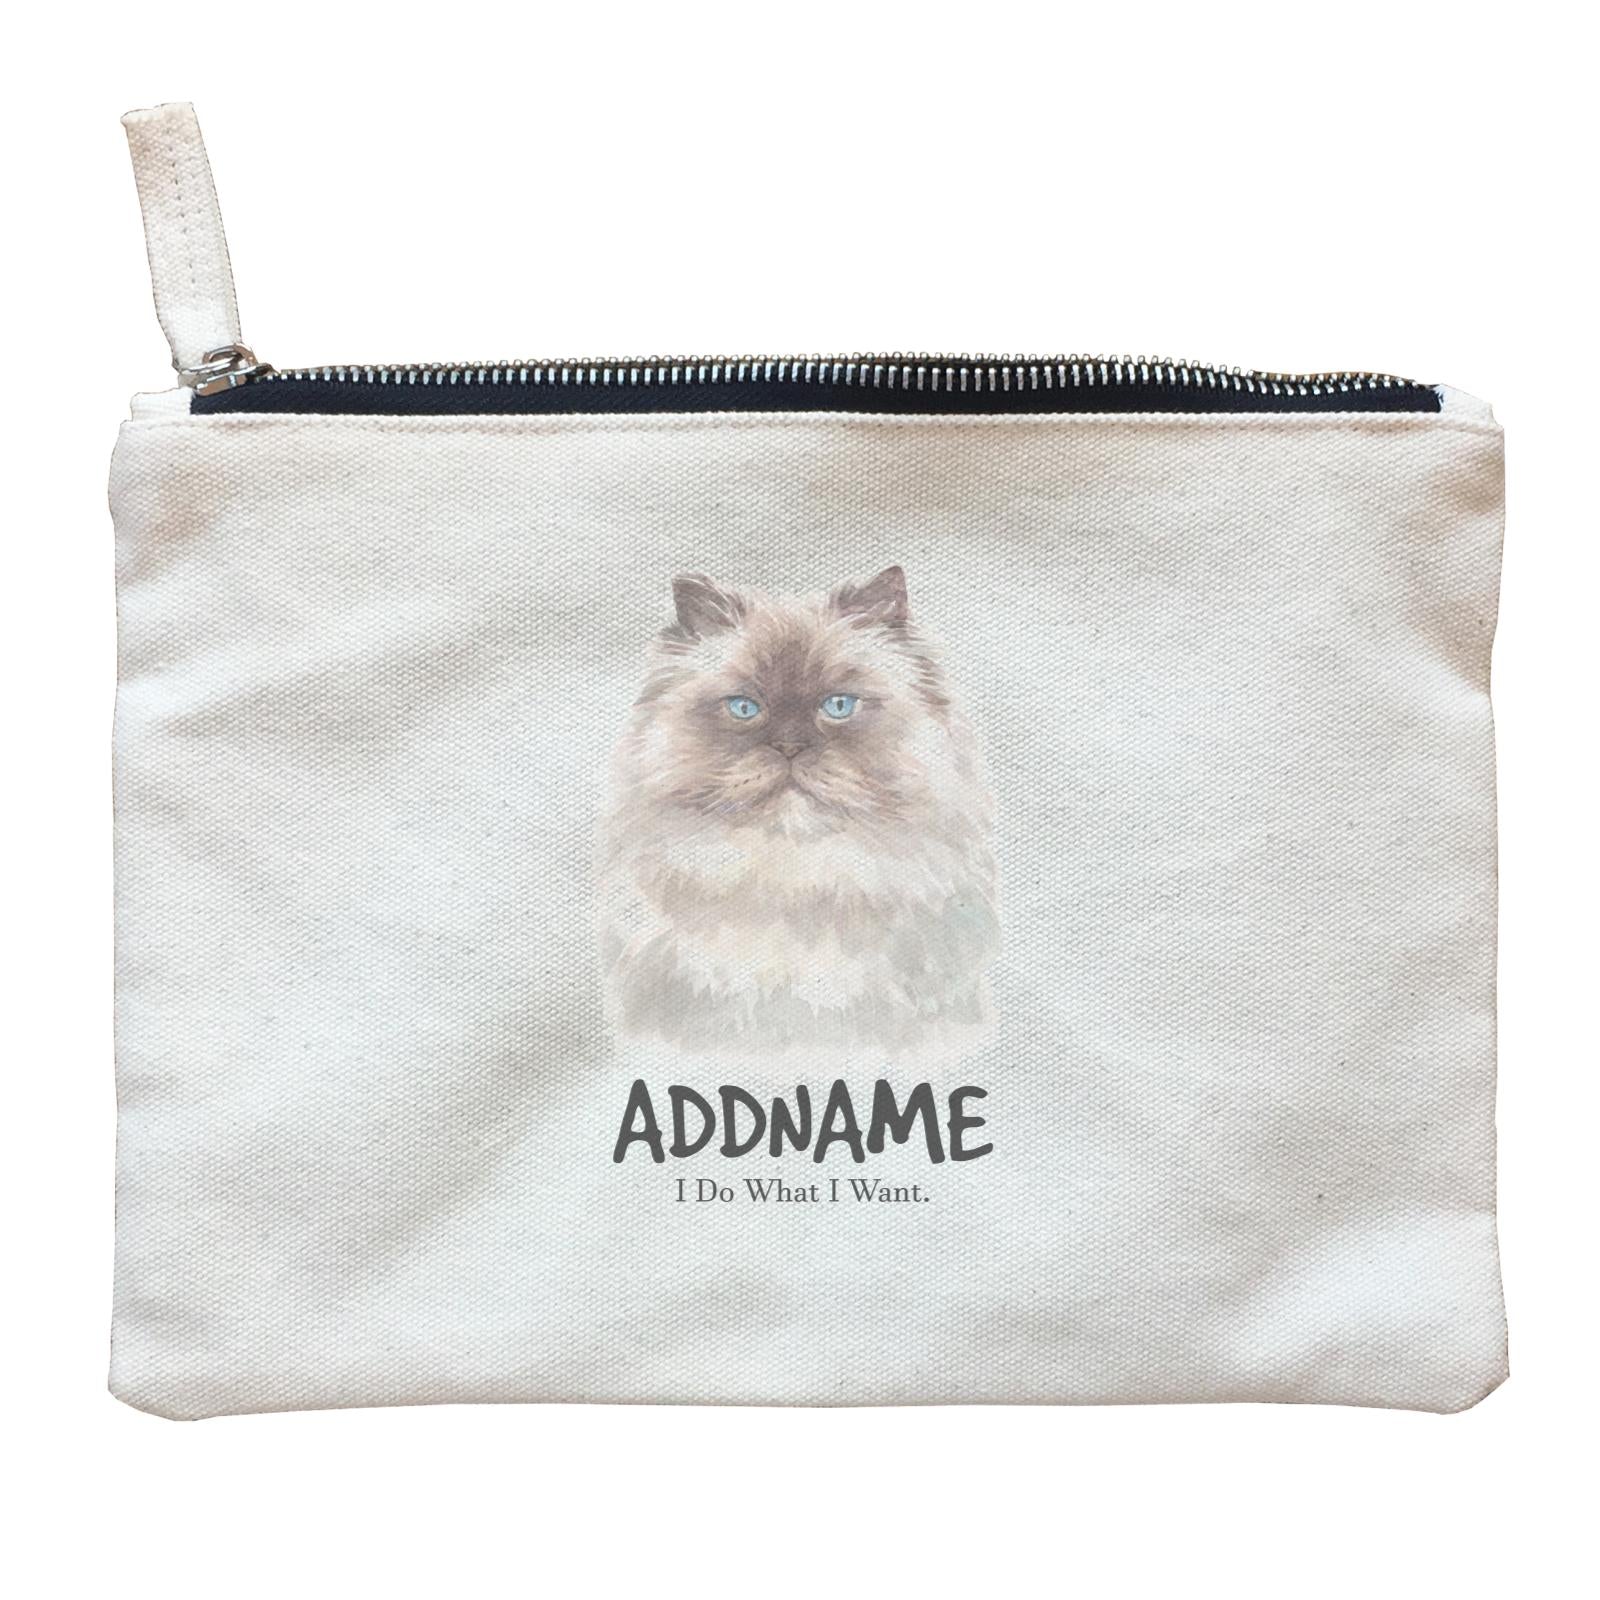 Watercolor Cat Himalayan Dark Face I Do What I Want Addname Zipper Pouch